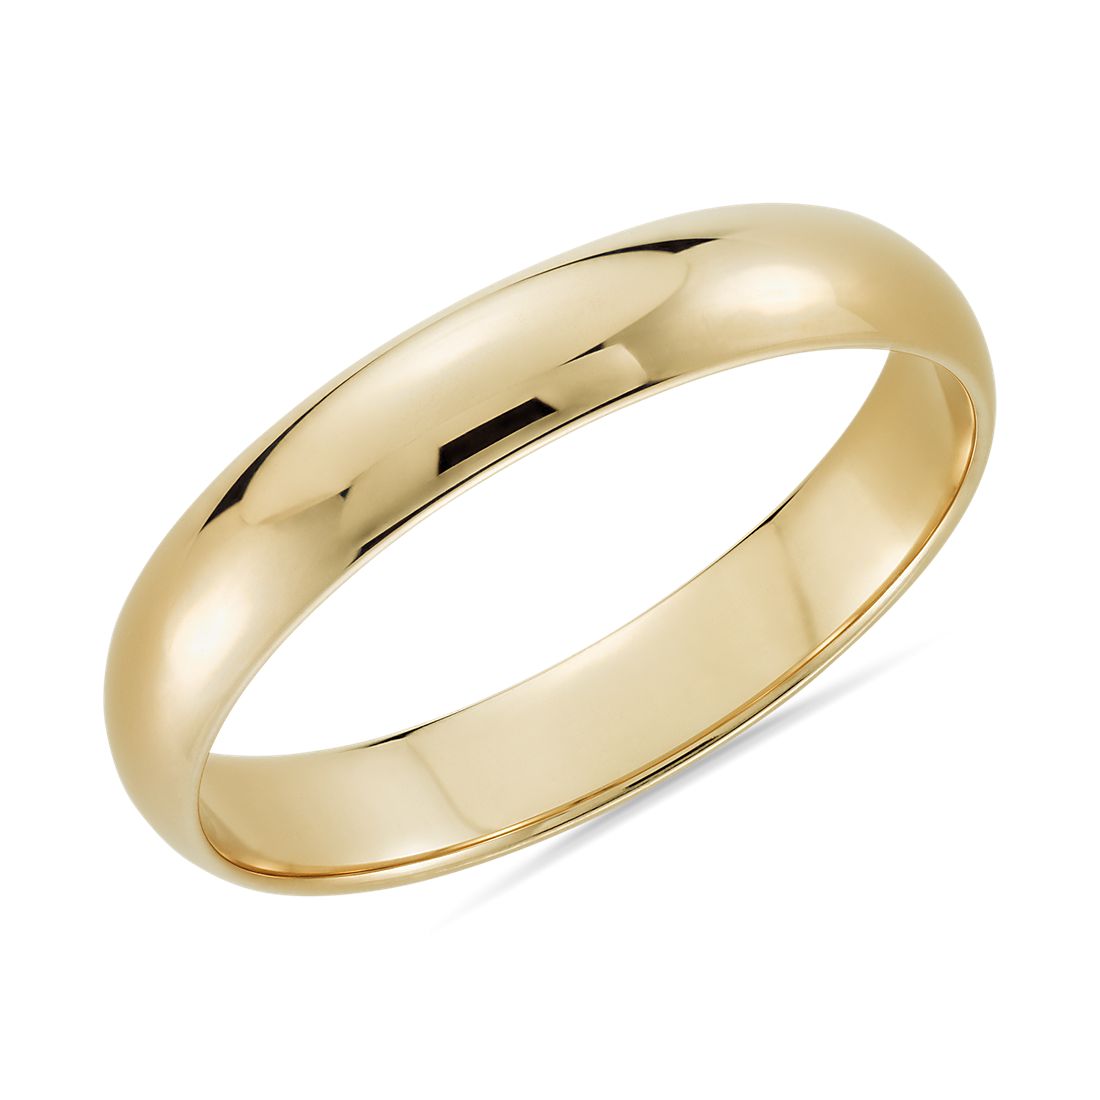 4 mm Solid 14k Yellow Gold Band Plain Wedding Ring Polished Finish Regular Fit